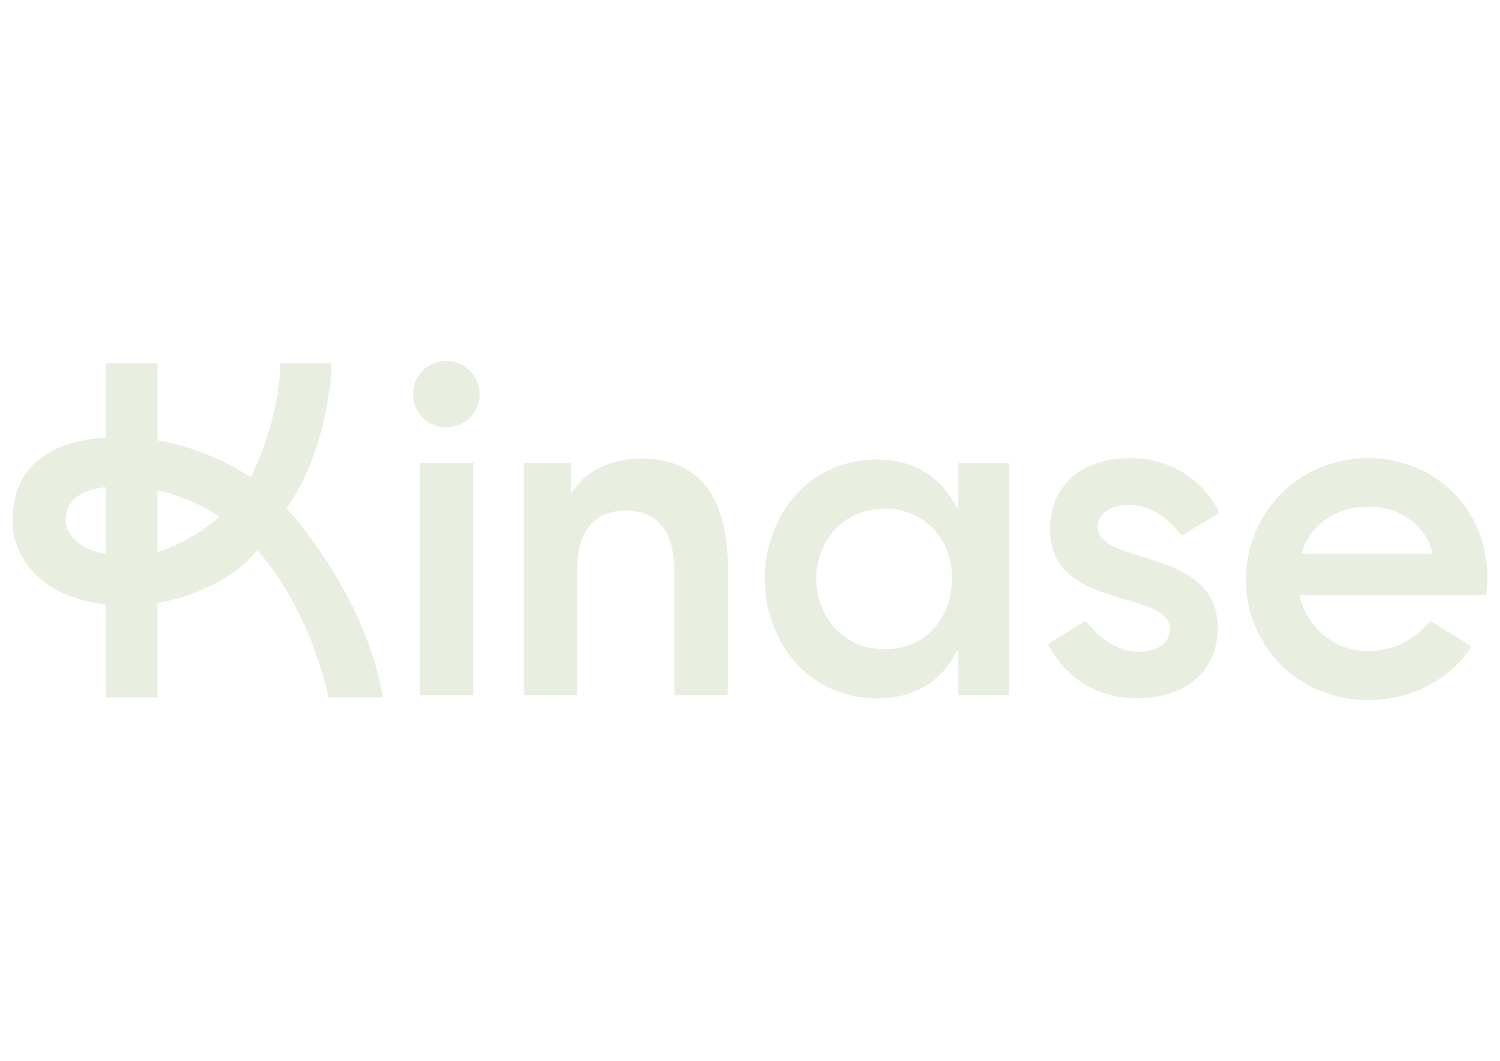 Kinase Digital Marketing | The Agency People Want to Work With